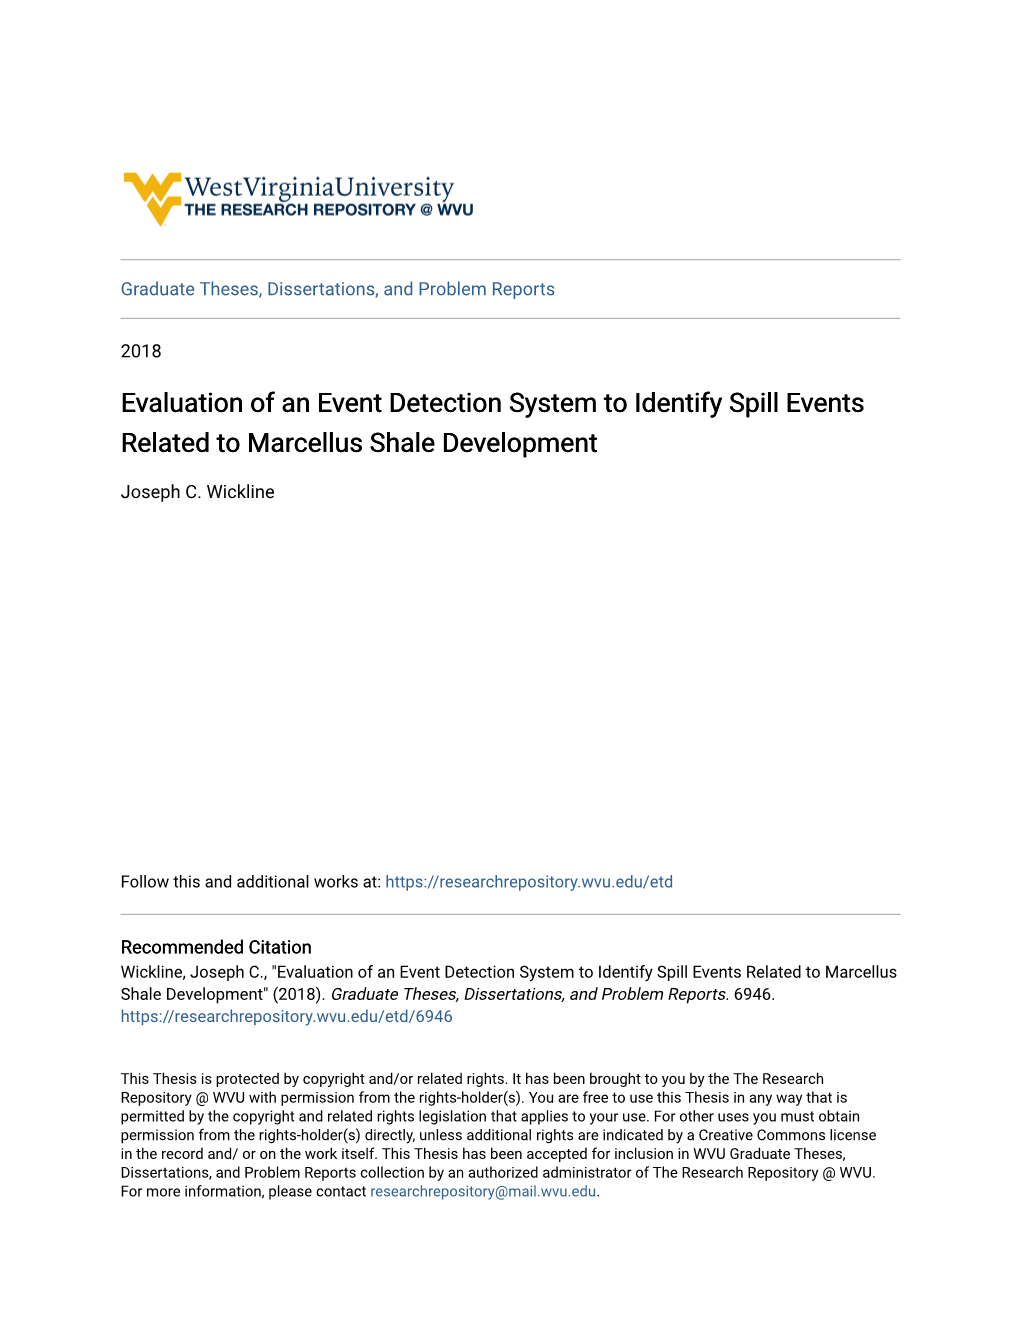 Evaluation of an Event Detection System to Identify Spill Events Related to Marcellus Shale Development